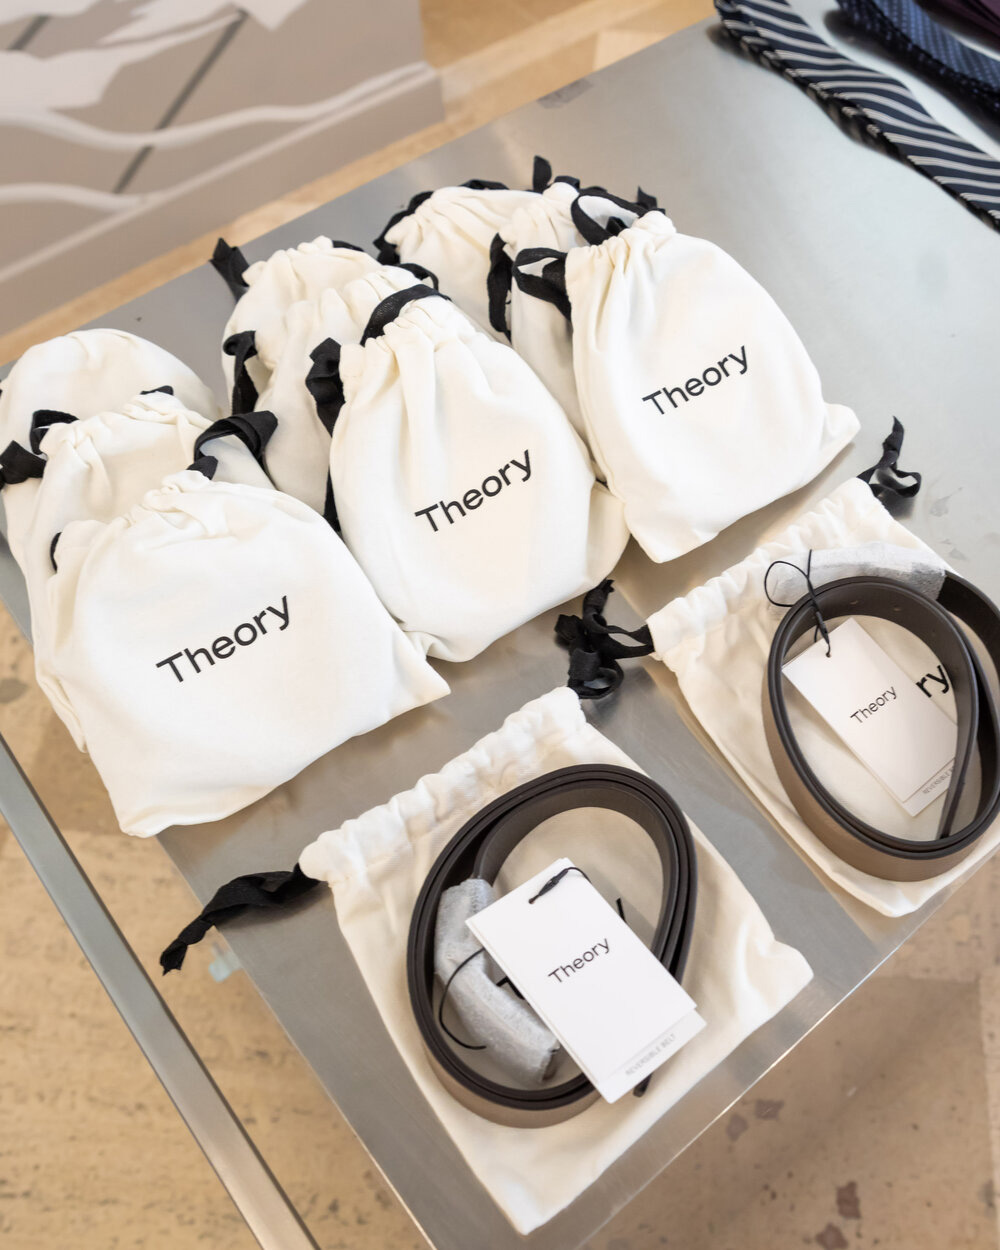 Theory Sample Sale in Images